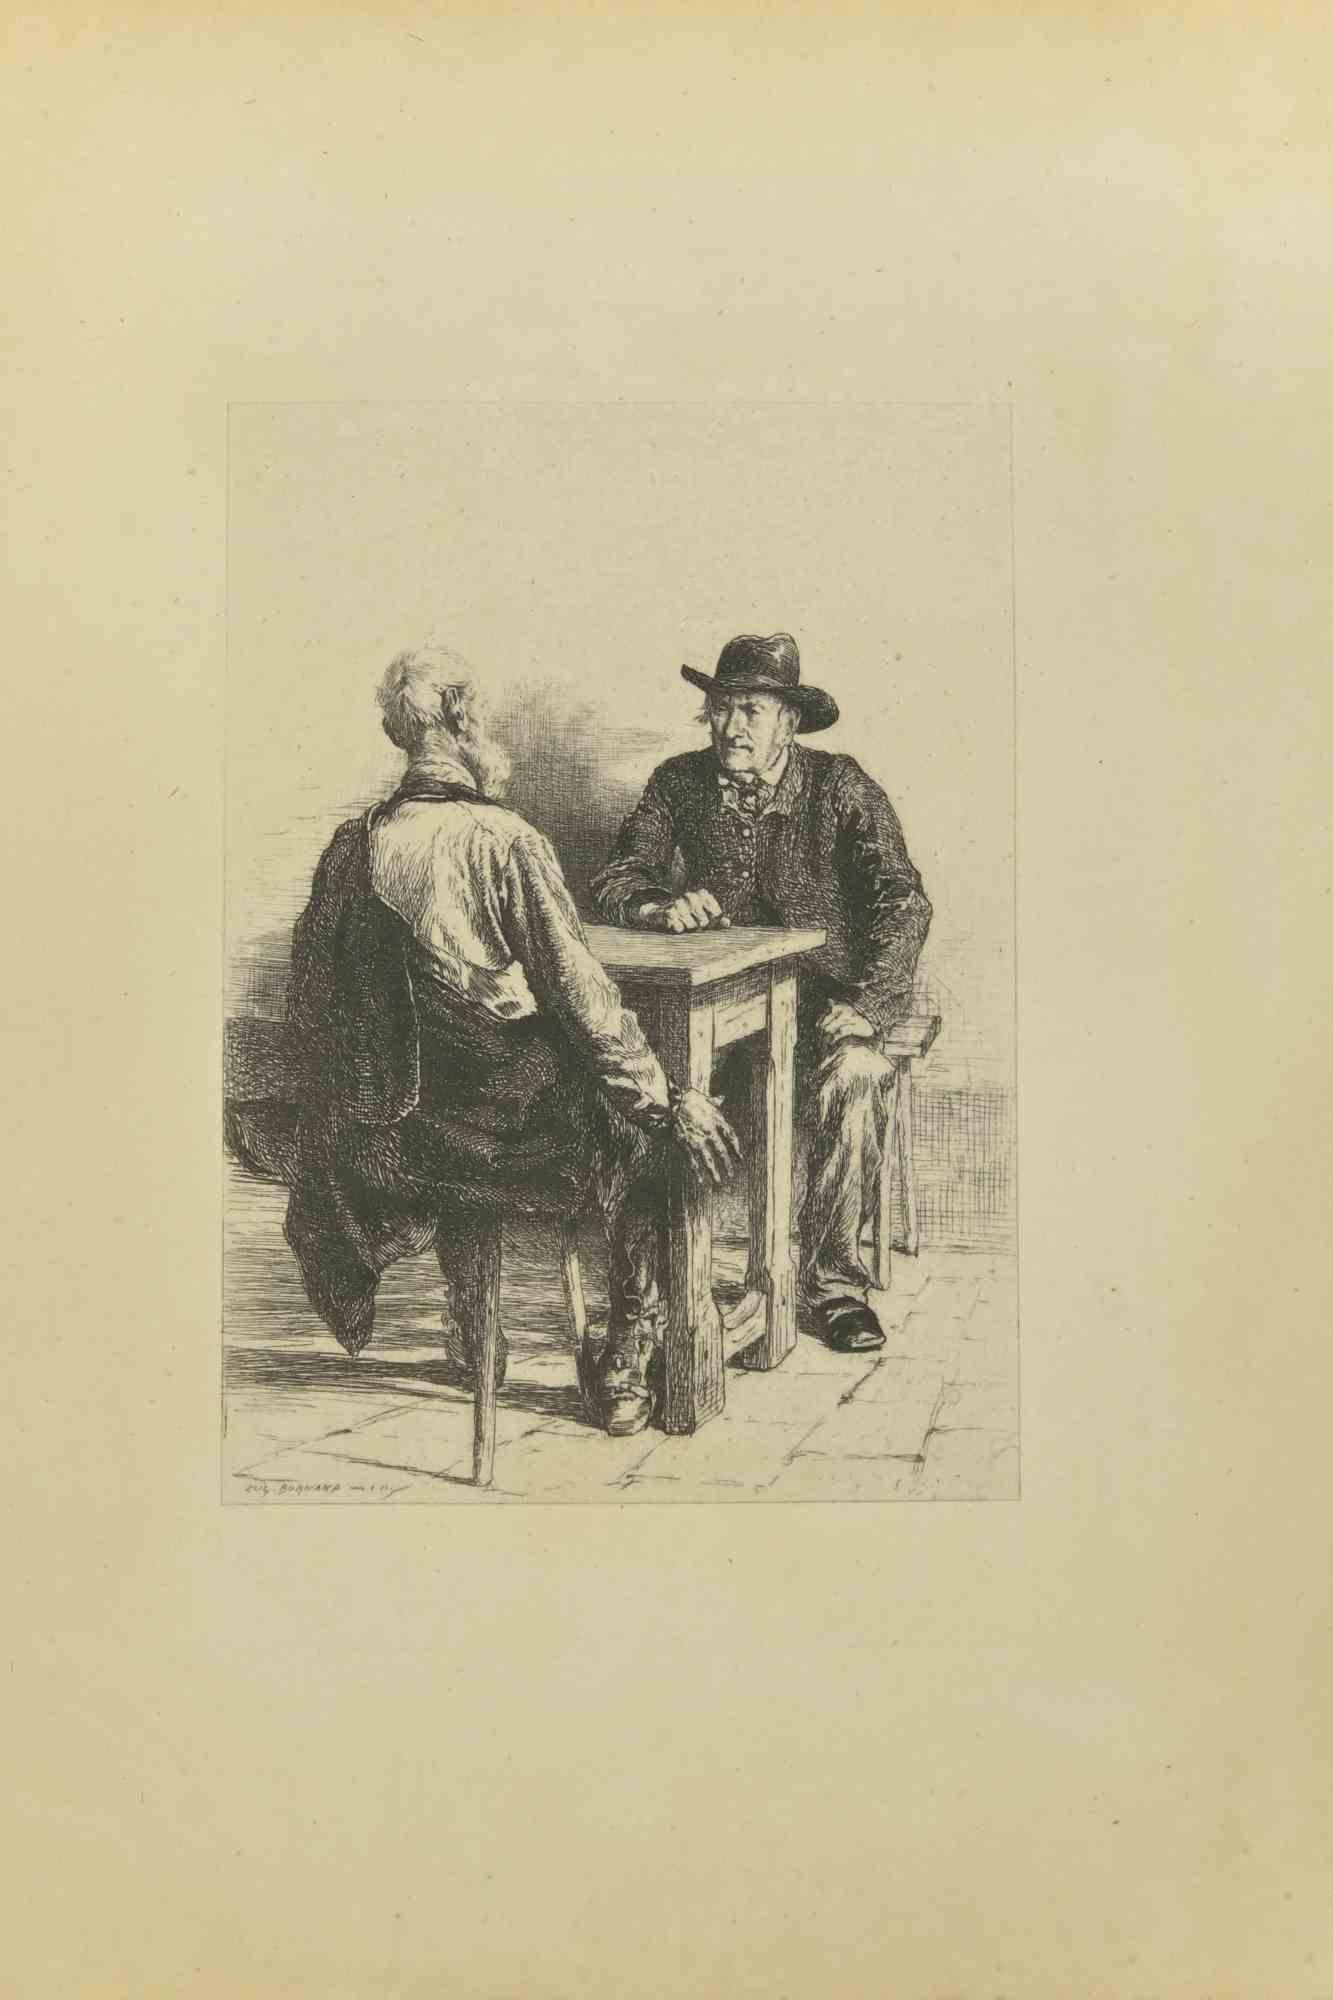 The Meeting is an etching realized by Eugène Burnard (1850-1921) in the Late 19th century.

Signed on the plate.

Good conditions with foxing.

The artwork is realized through short and deft strokes, an admirable scene created by realistic mastery